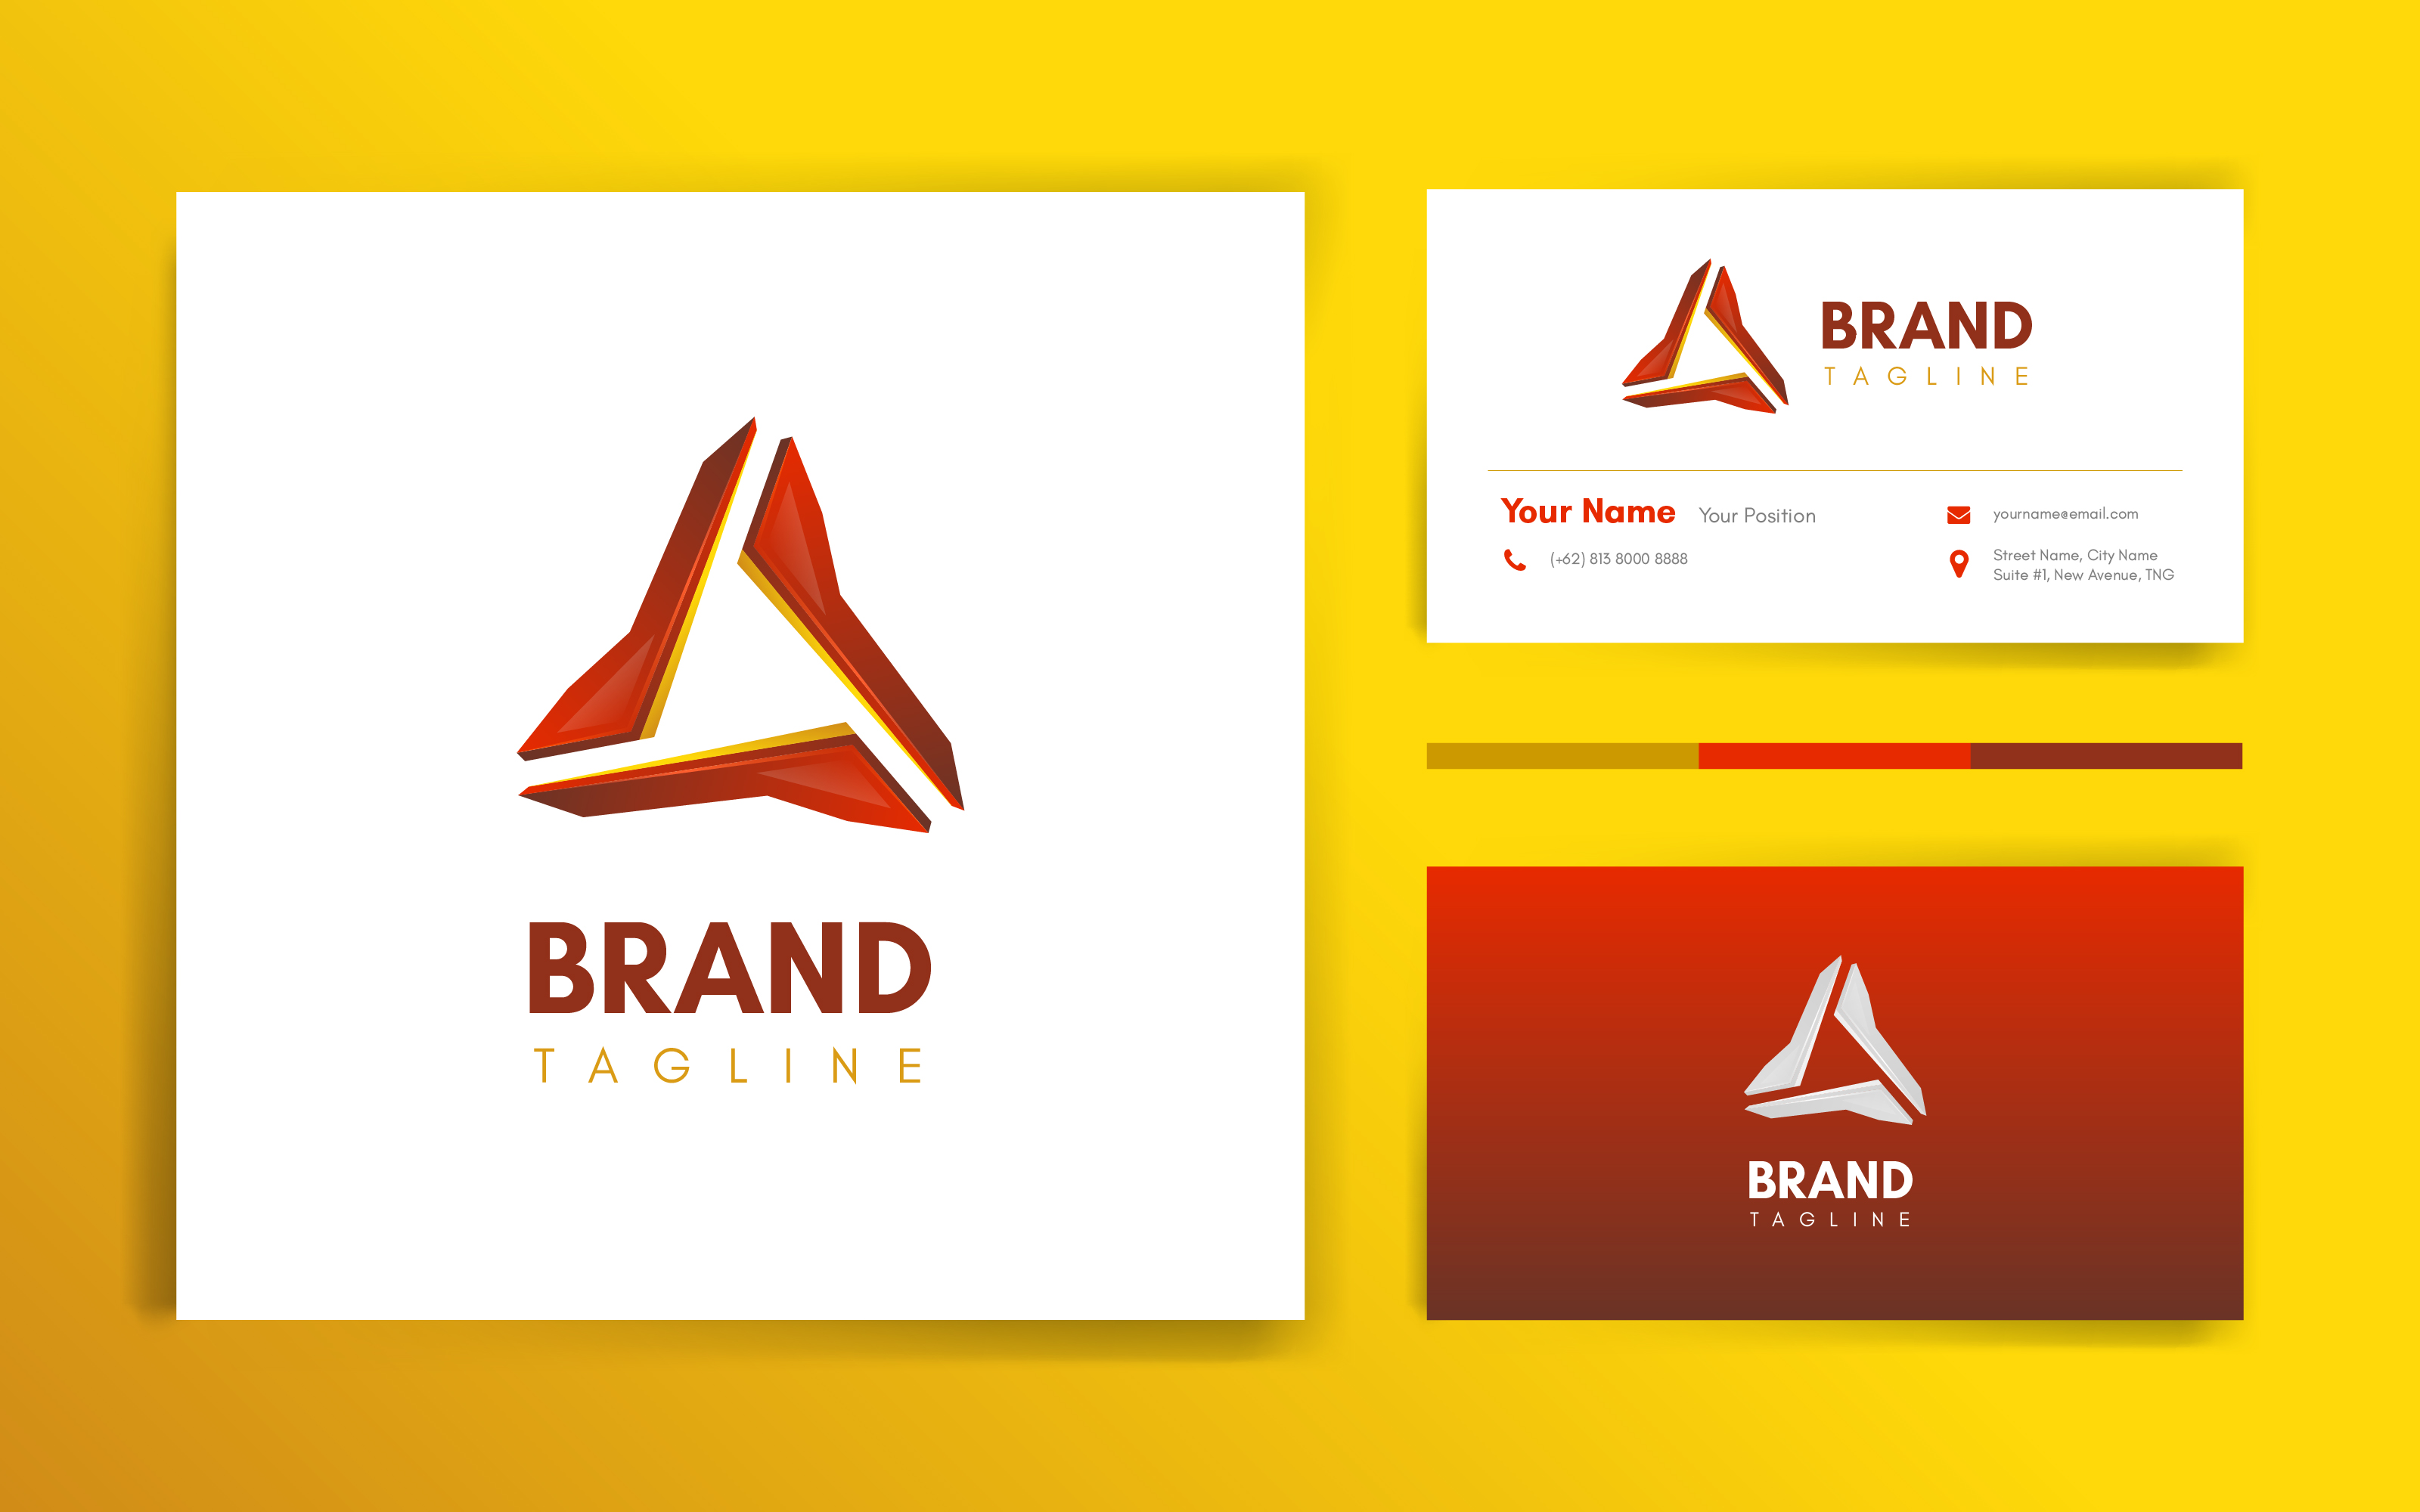 What Brand Has A Red Triangle Logo